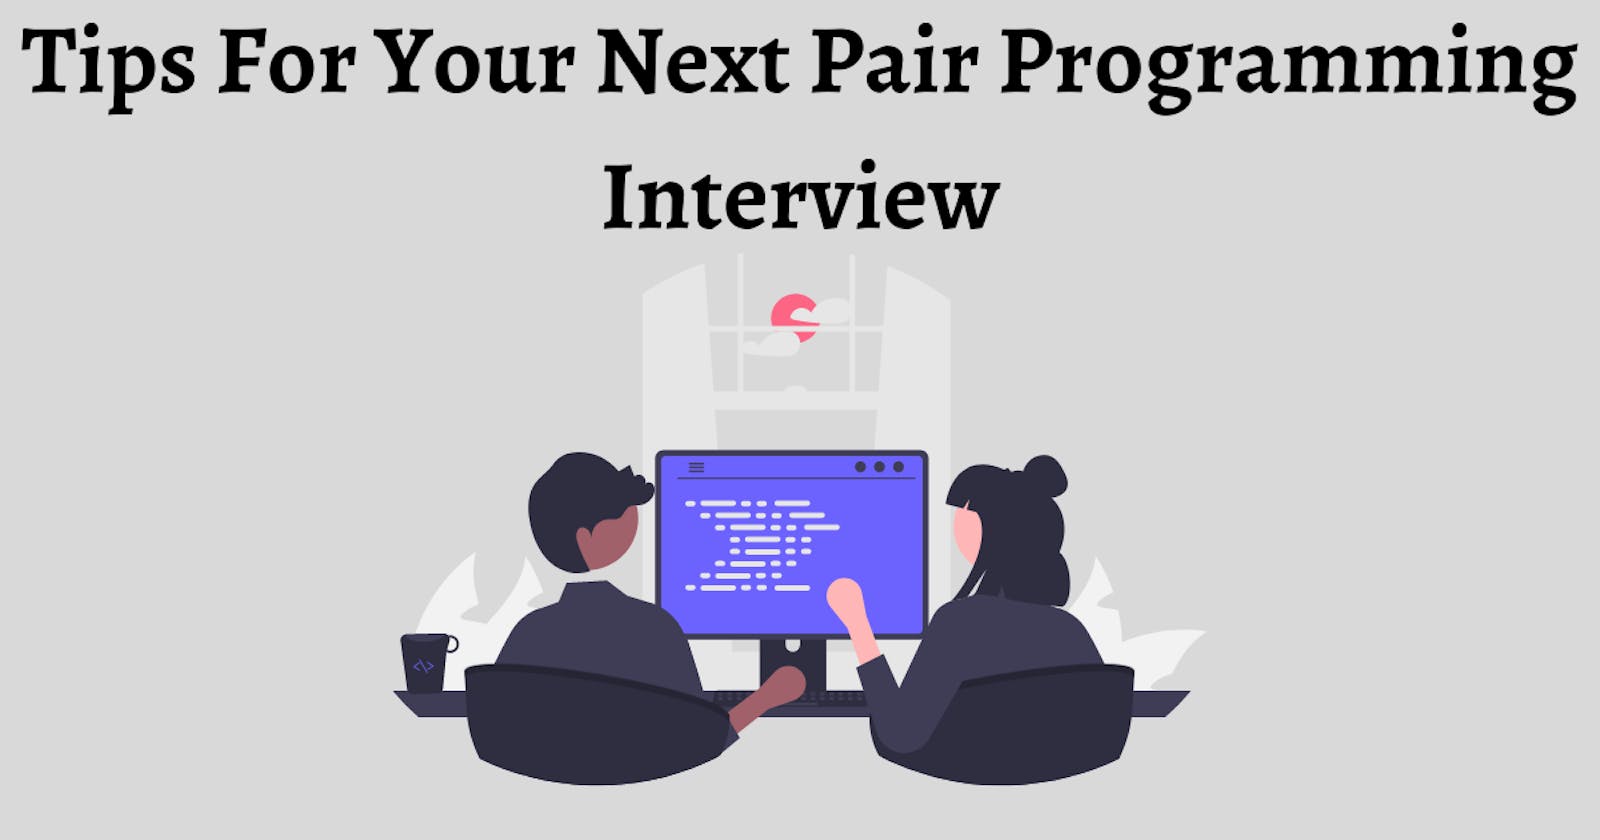 Tips For Your Next Pair Programming Interview